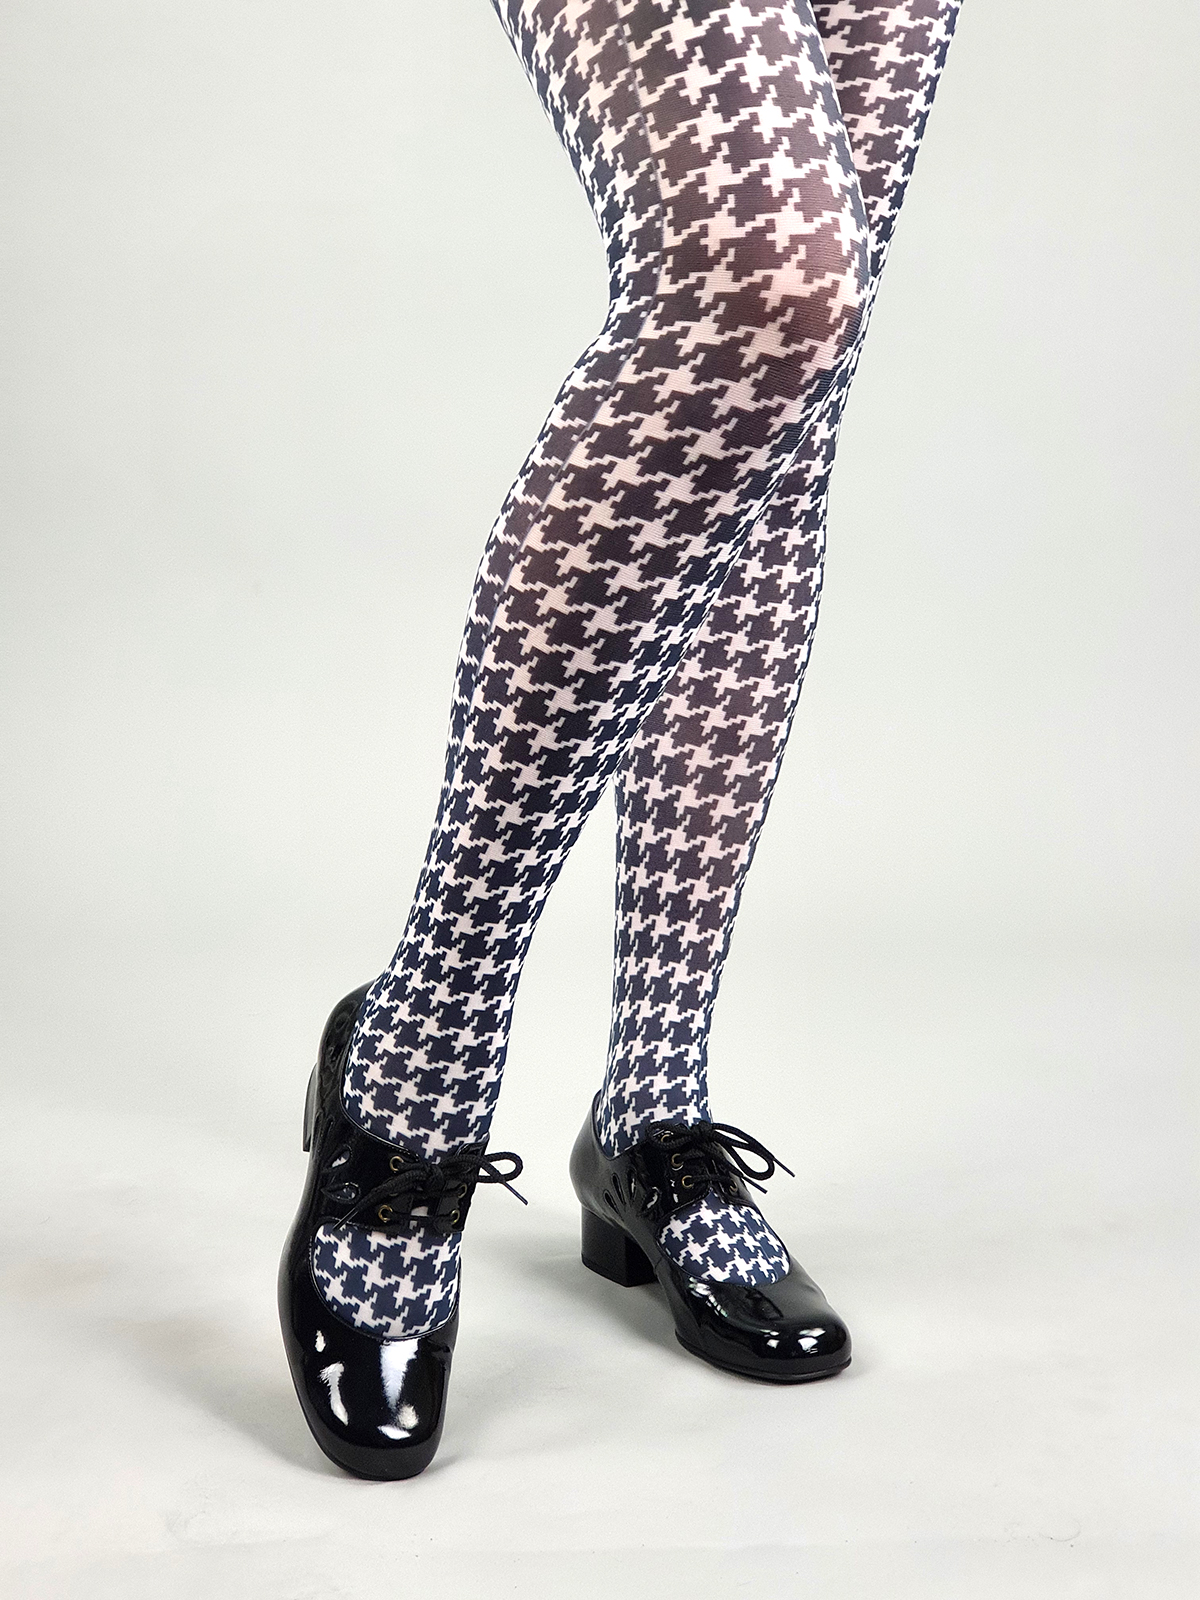 Dogtooth Pattern Tights – ladies vintage retro 60s – 70s style – Mod Shoes